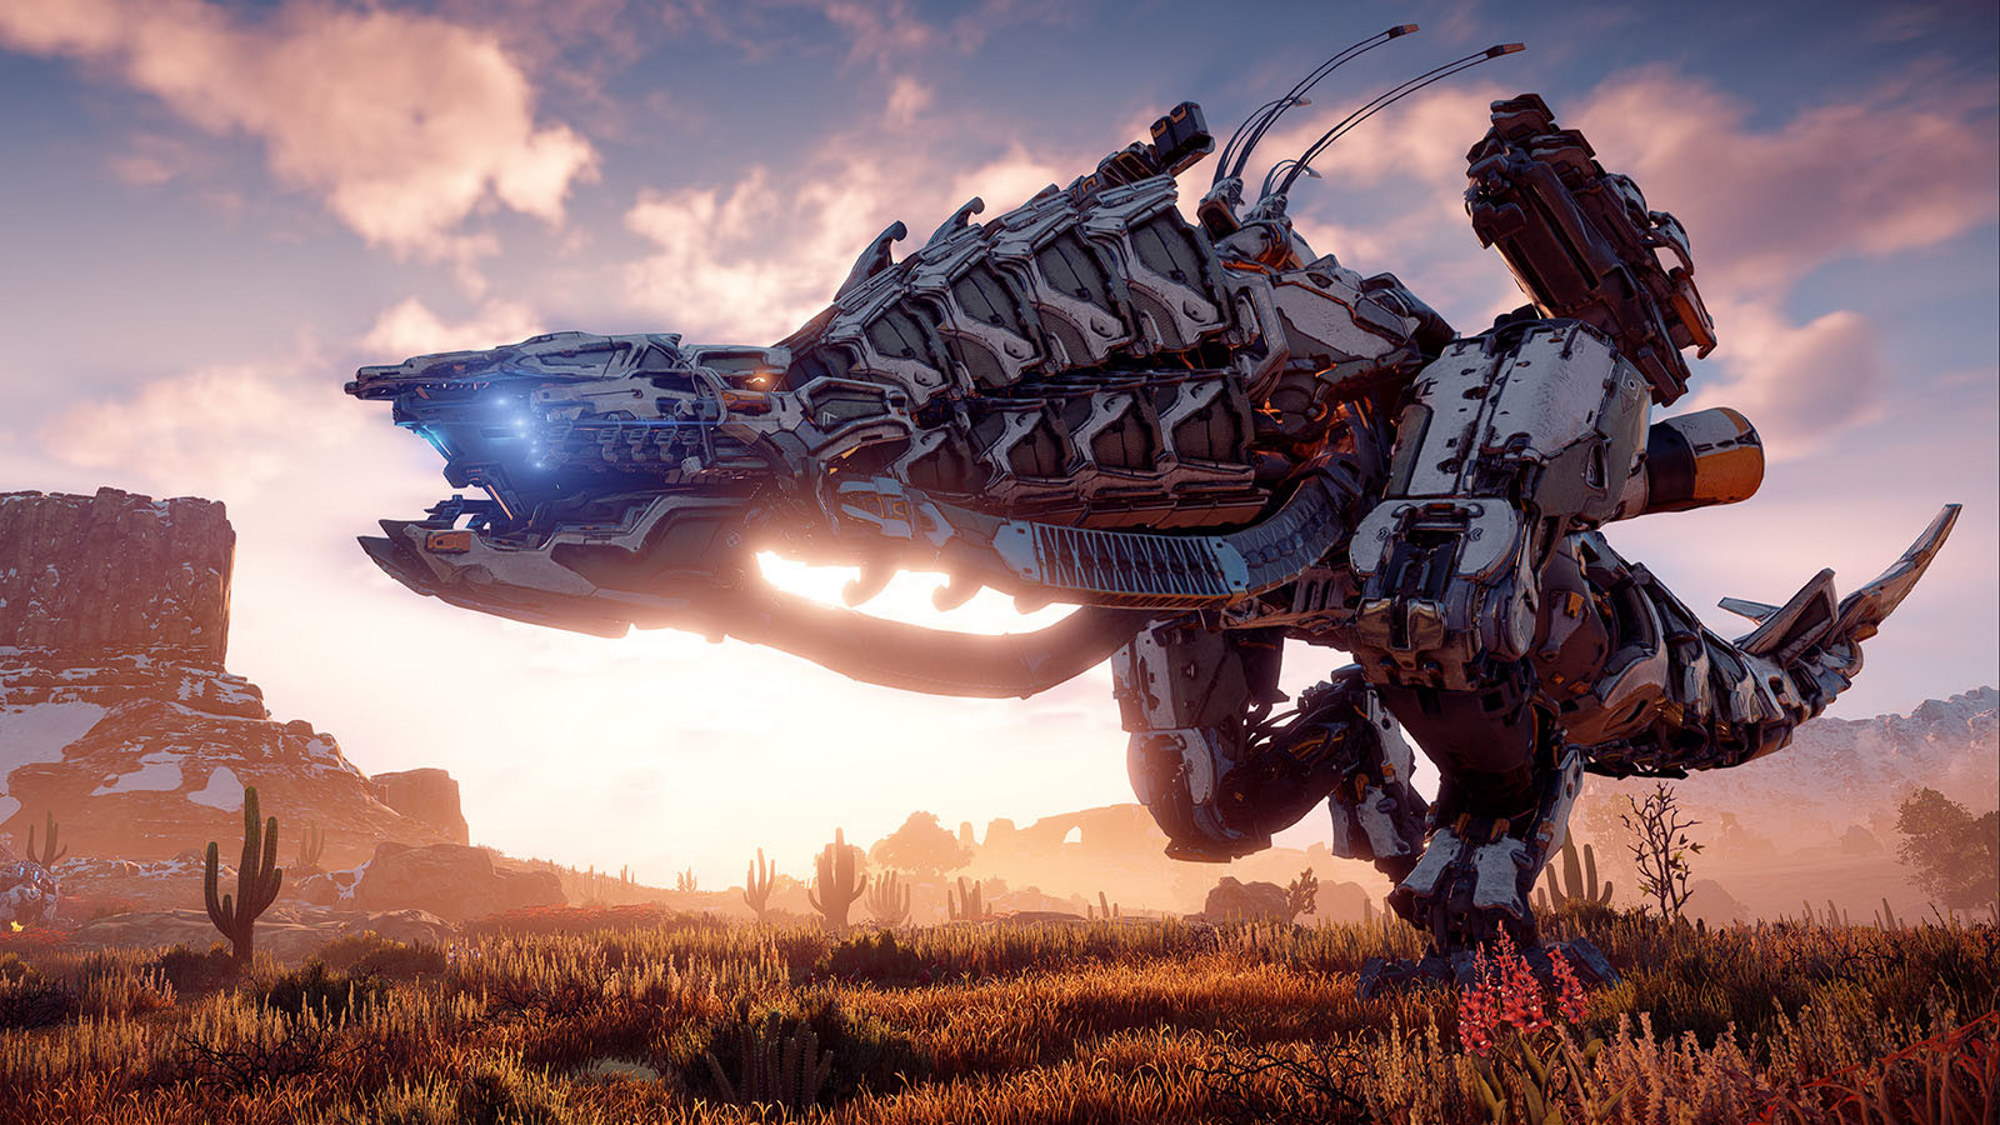 Horizon Zero Dawn S Rich Storytelling And Robot Dinosaurs Make For An Experience Like None Other Rog Republic Of Gamers Global